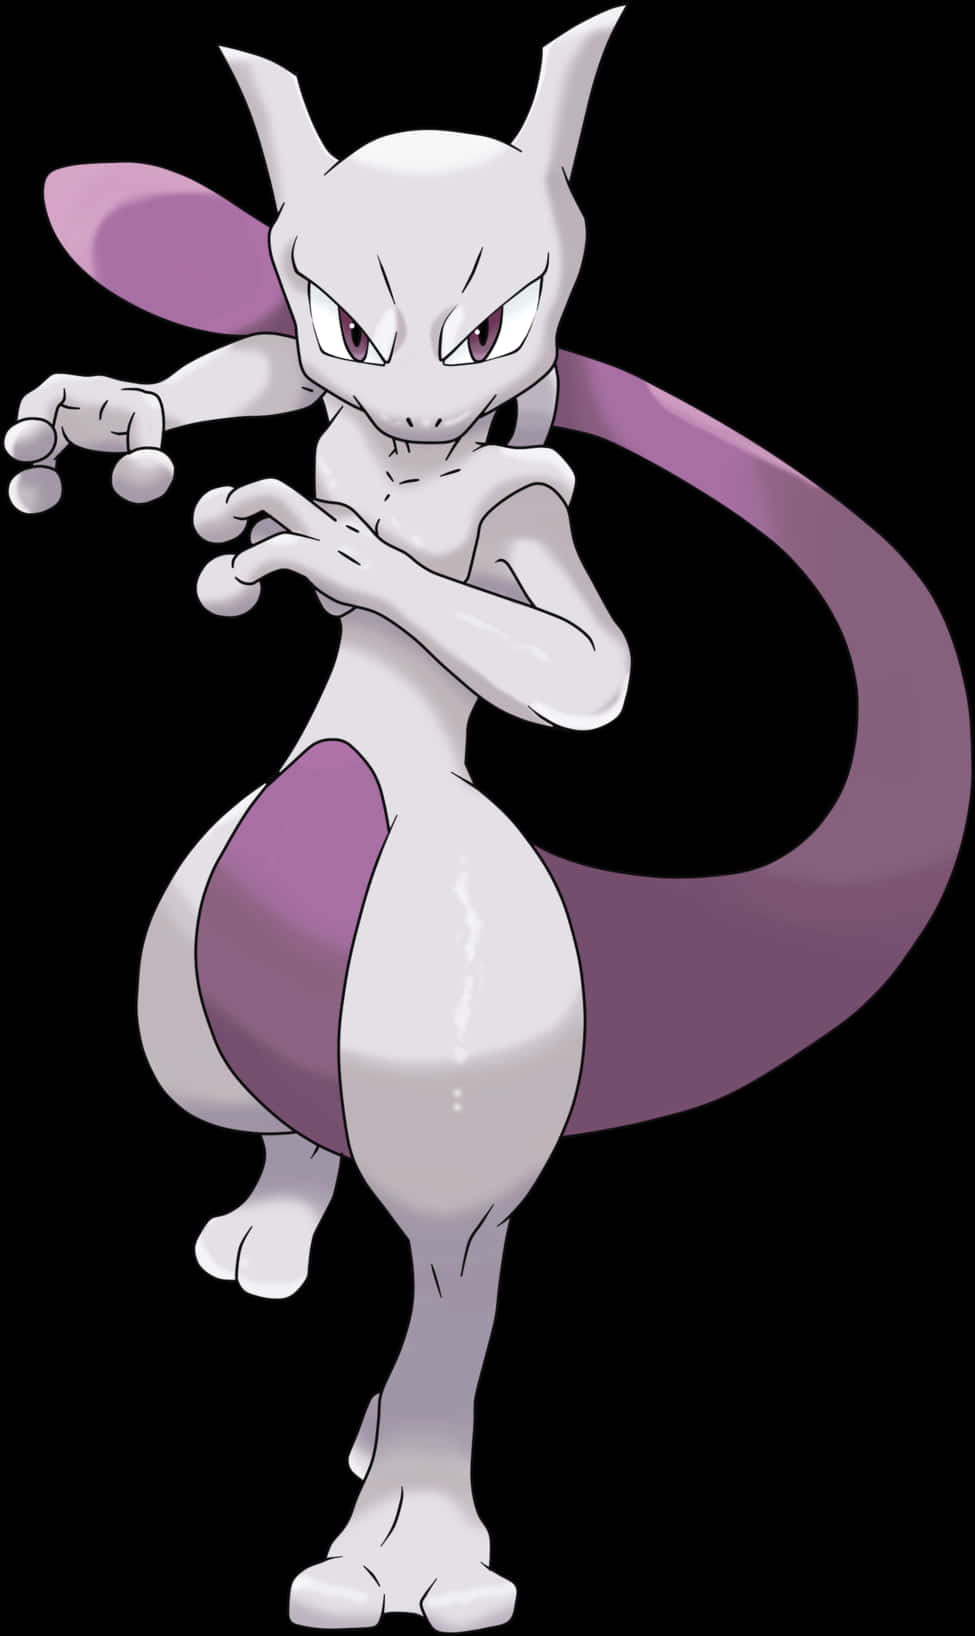 Mewtwo Powerful Psychic Pokemon PNG image